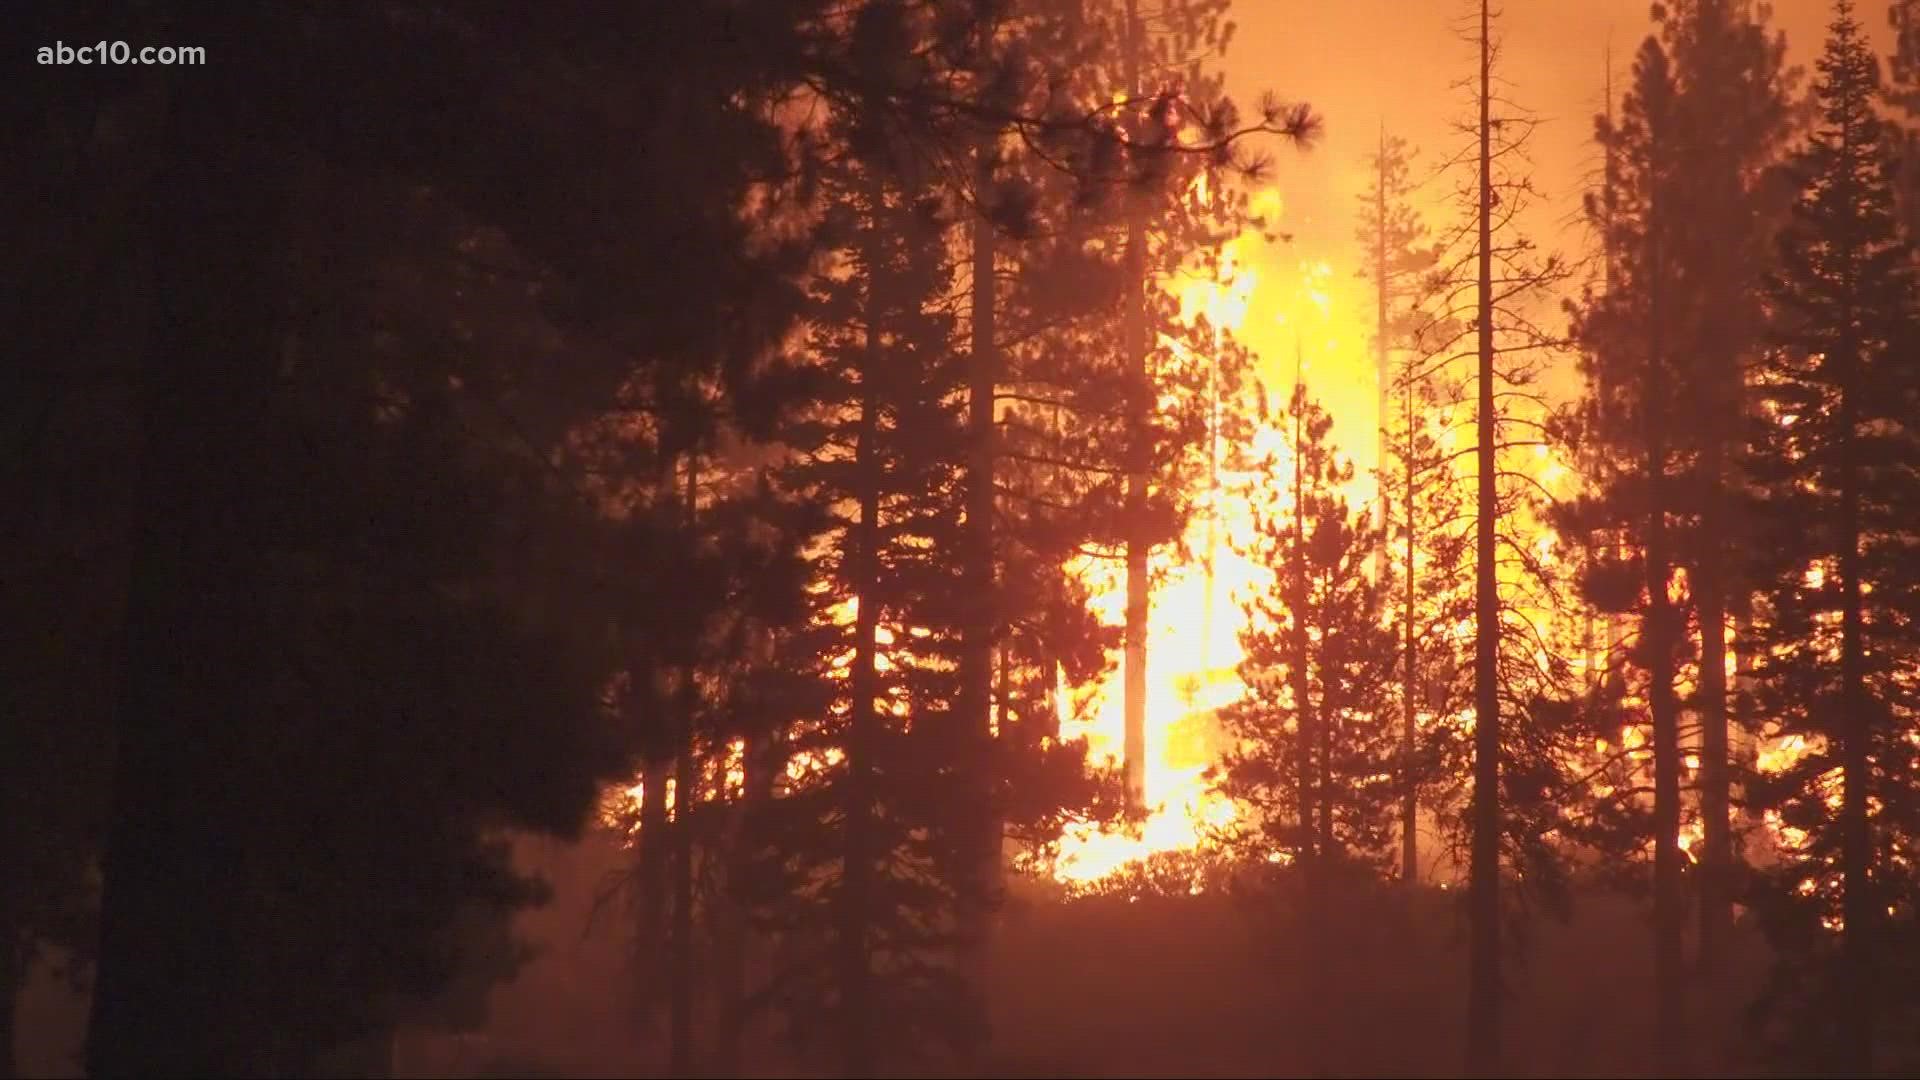 Fire officials said the Caldor Fire has made its way down to Christmas Valley and Meyers in El Dorado County.